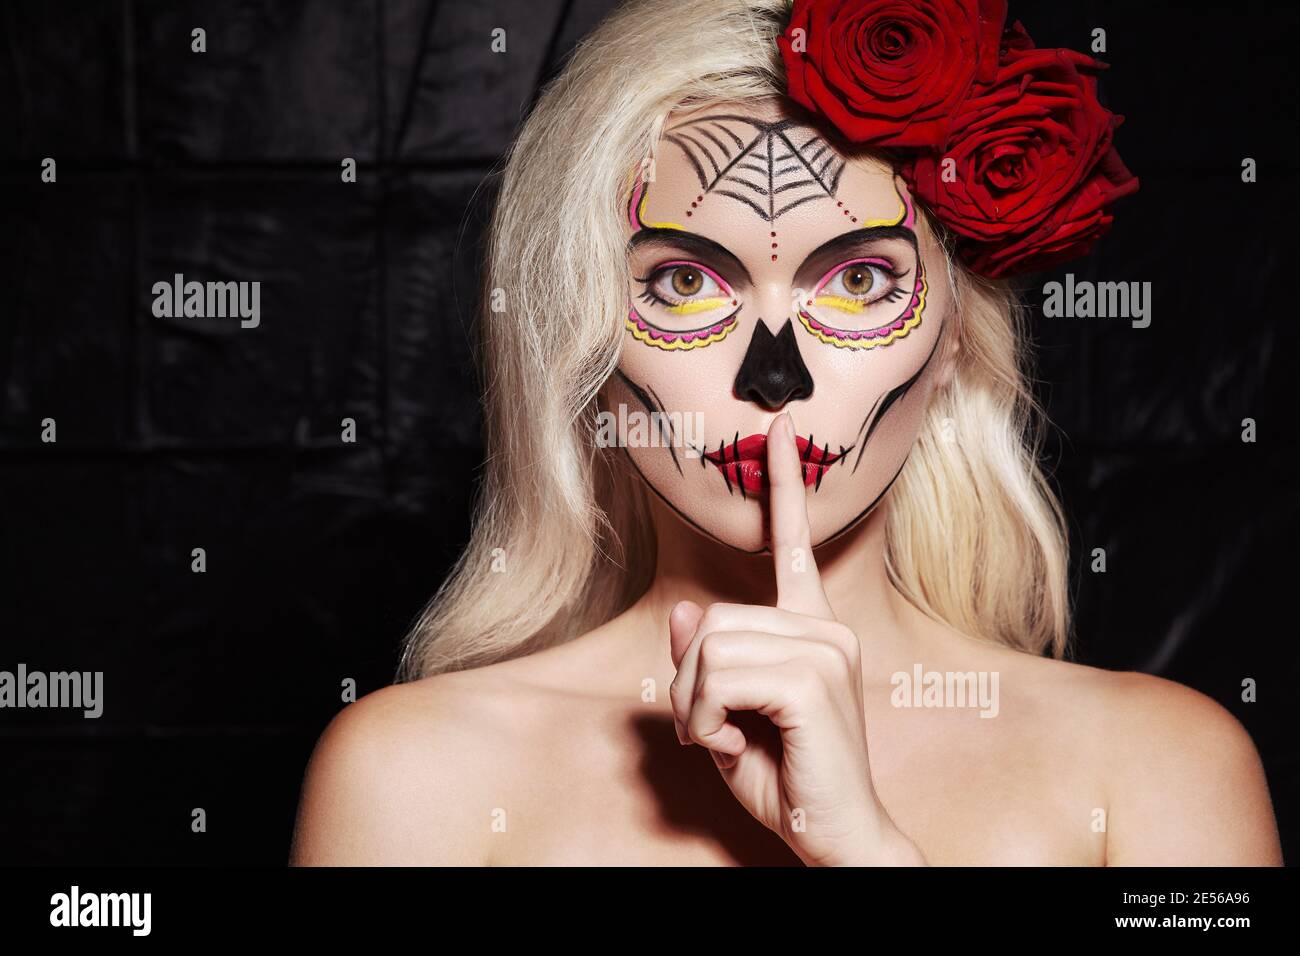 Beautiful Halloween Make-Up Style. Blond Model Wear Sugar Skull Makeup with Red Roses, pale Skin Tones and Waves Hair. Santa Muerte concept. Silence G Stock Photo